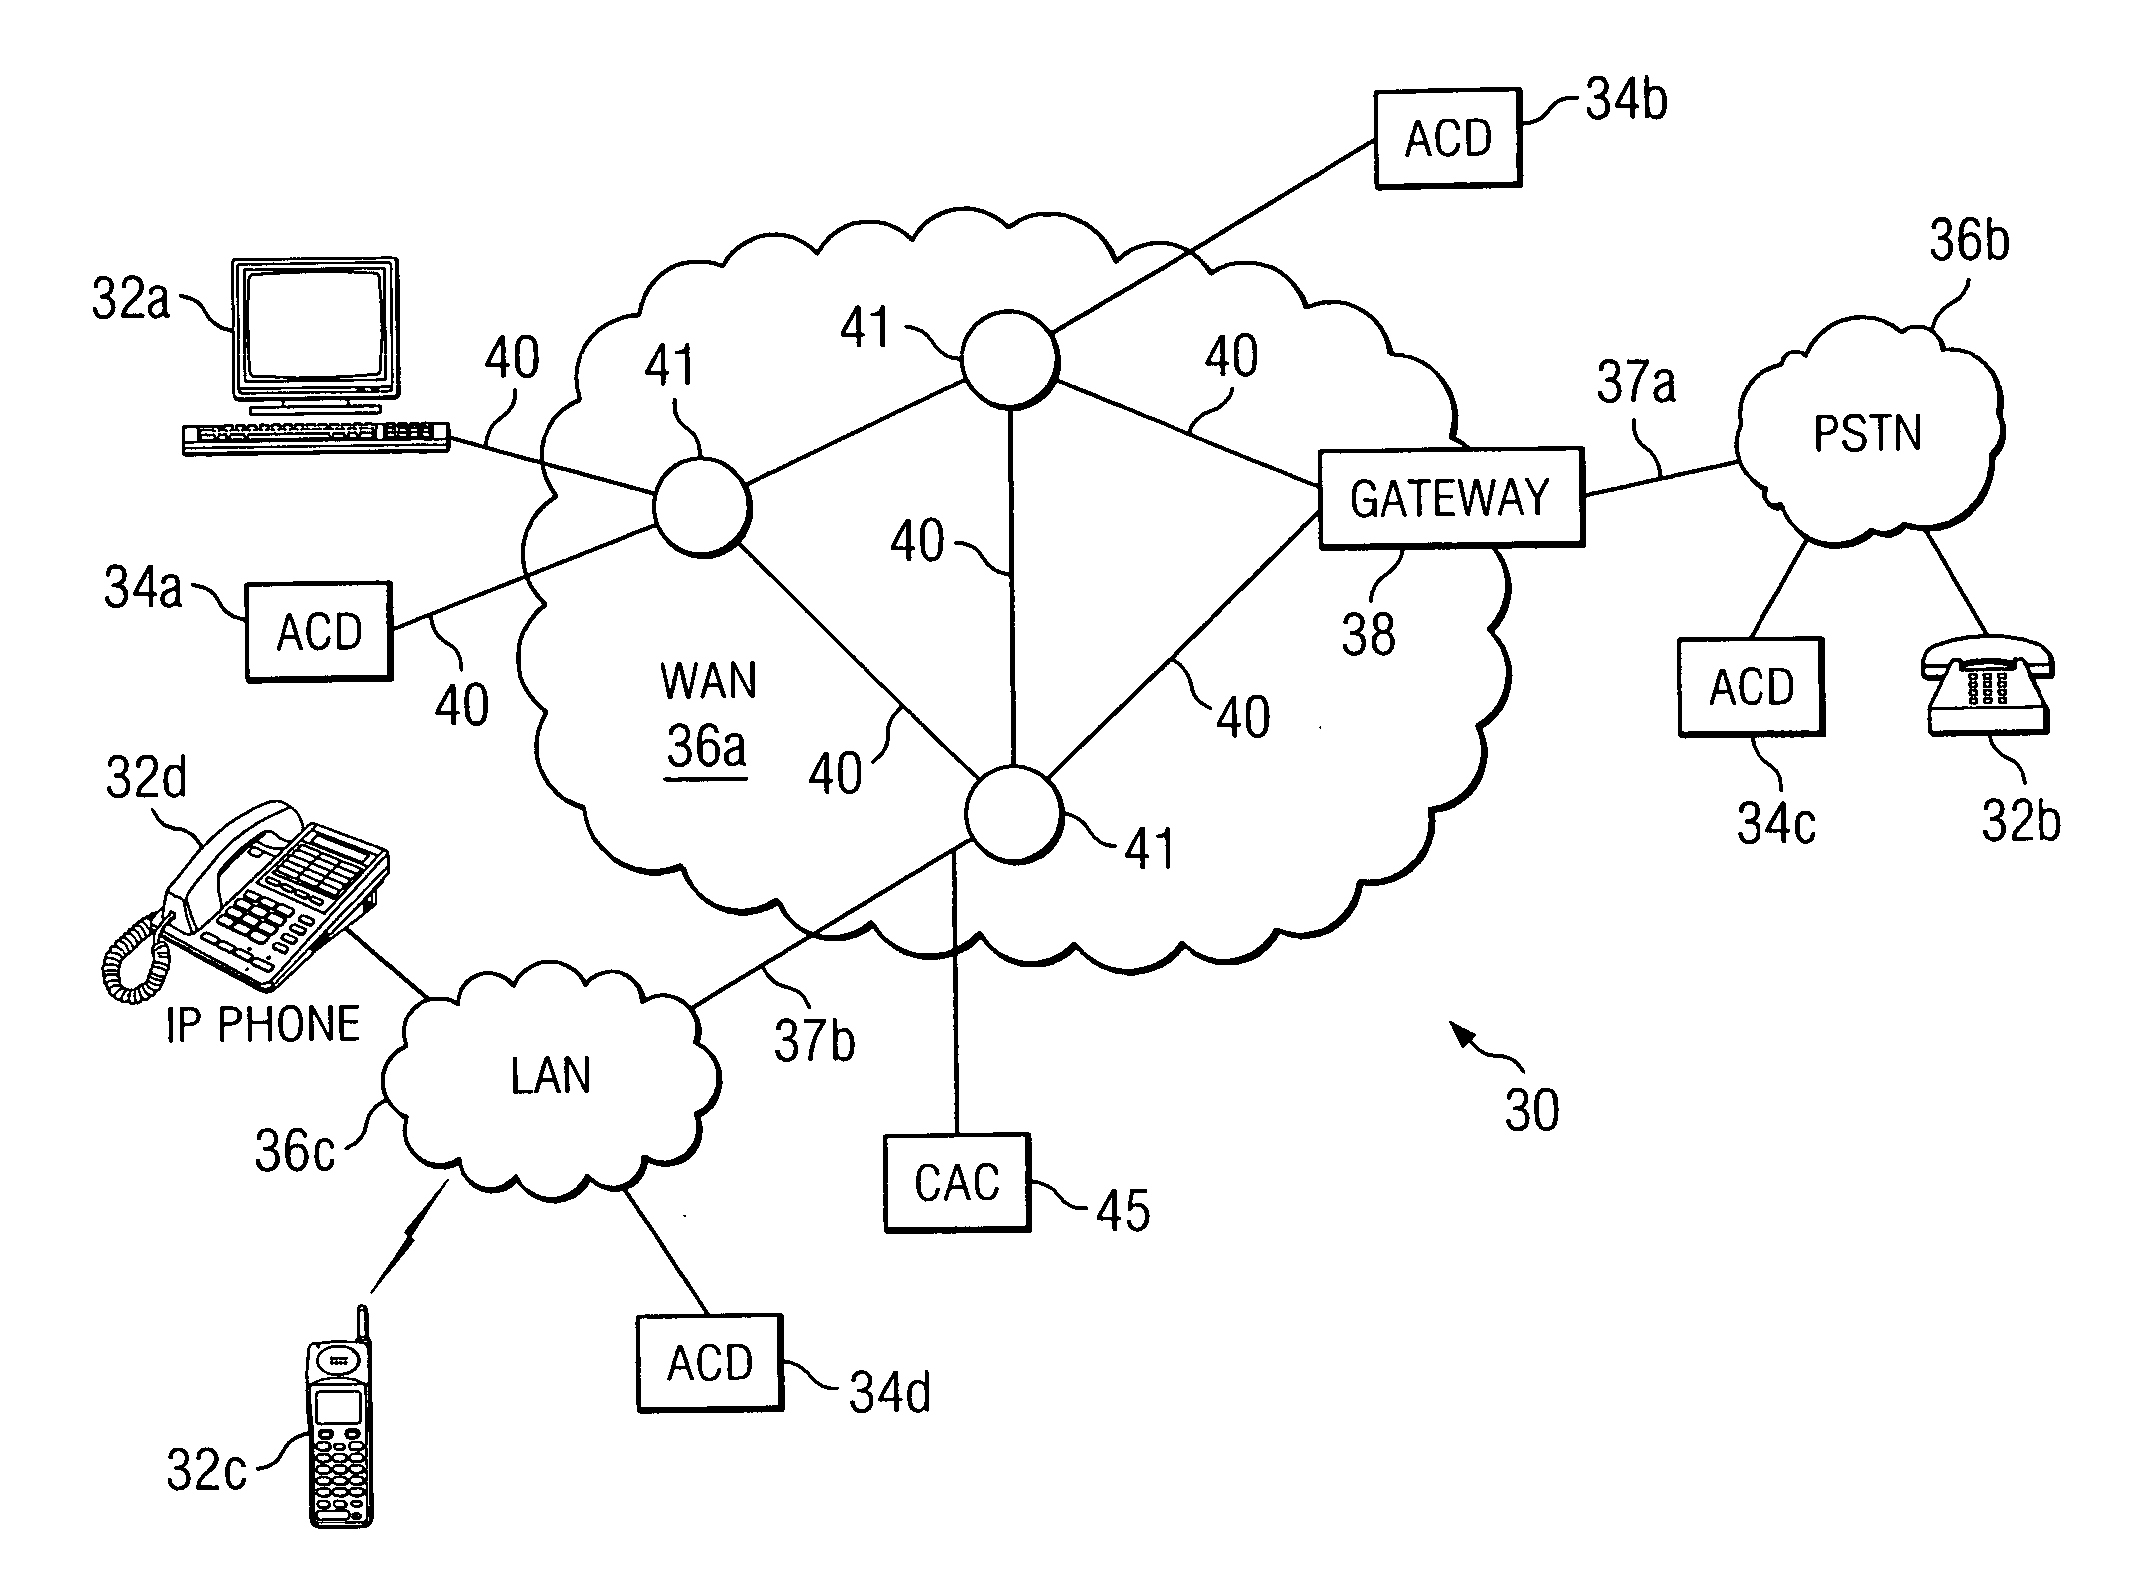 Method and system for managing calls of an automatic call distributor